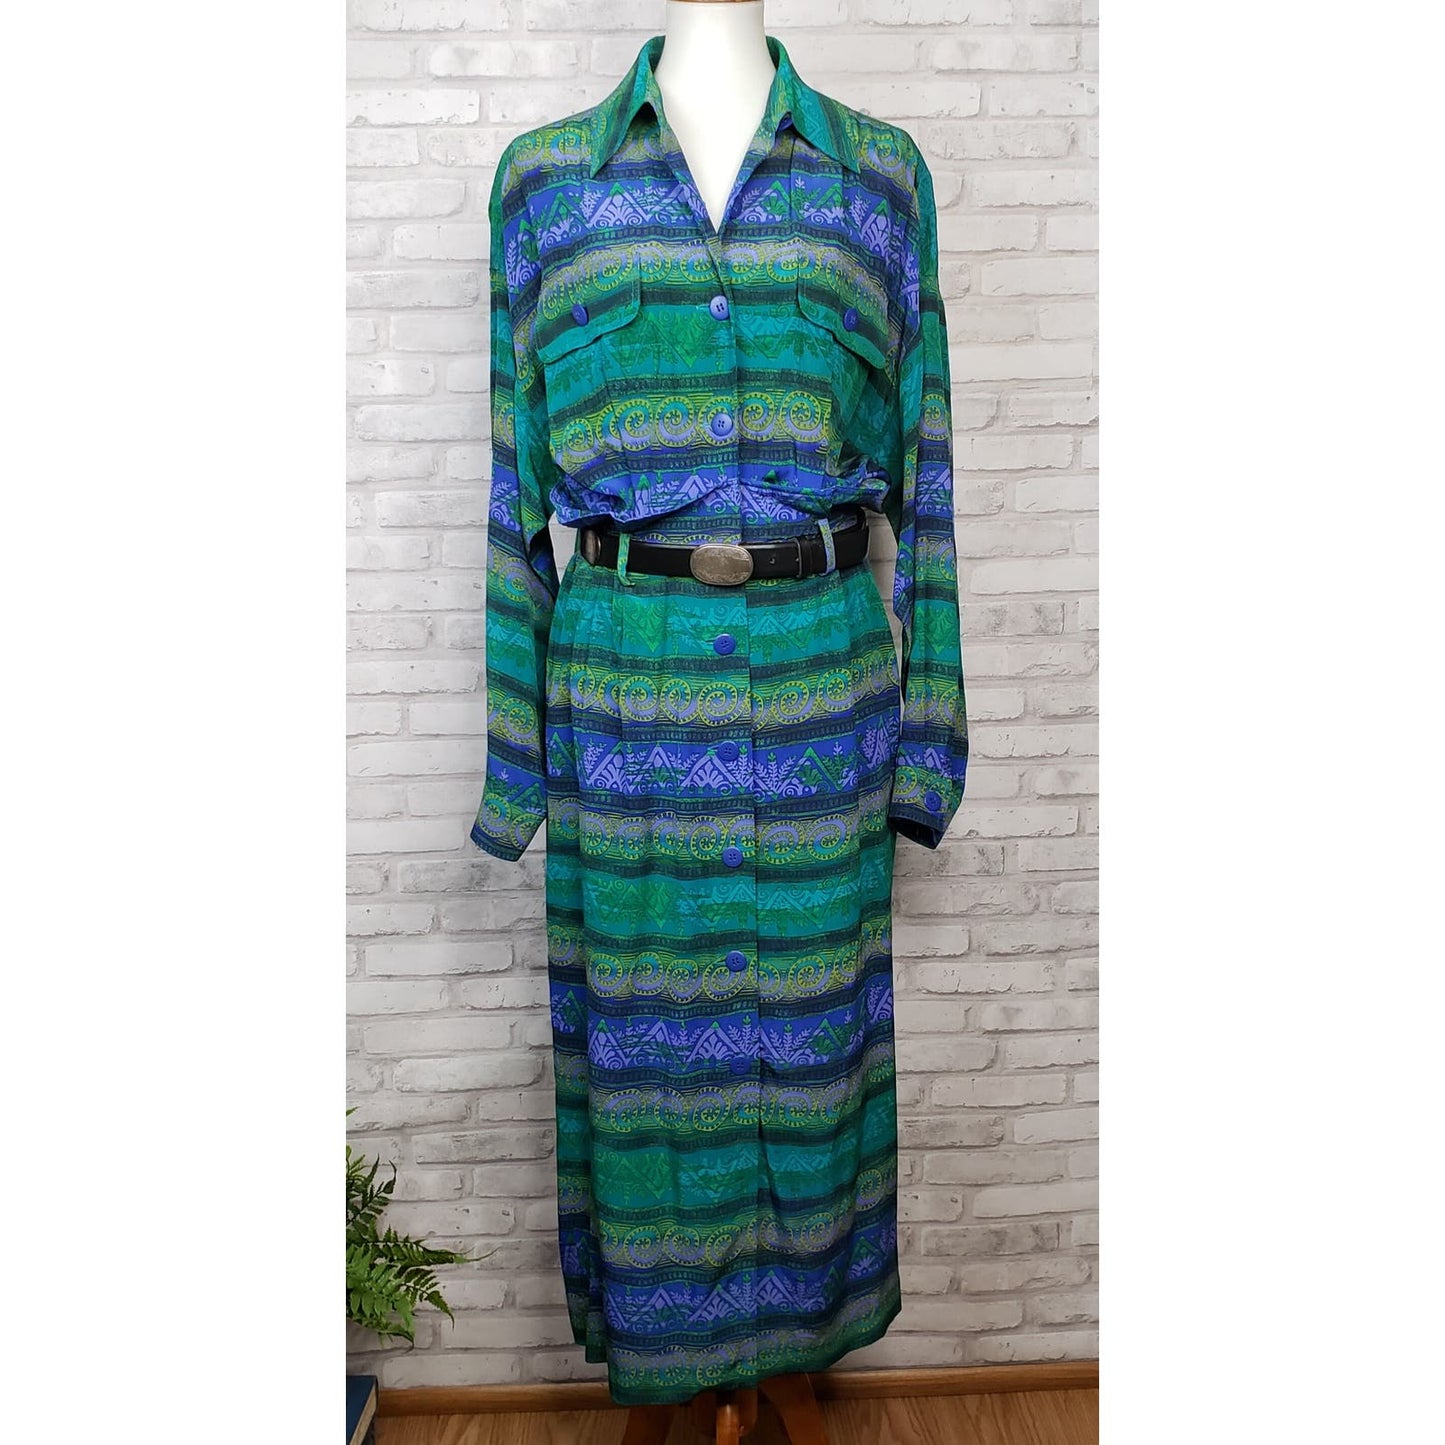 Silk shirt dress with paper-bag waist size 14 teal blue, green and purple, black Italian leather belt included,